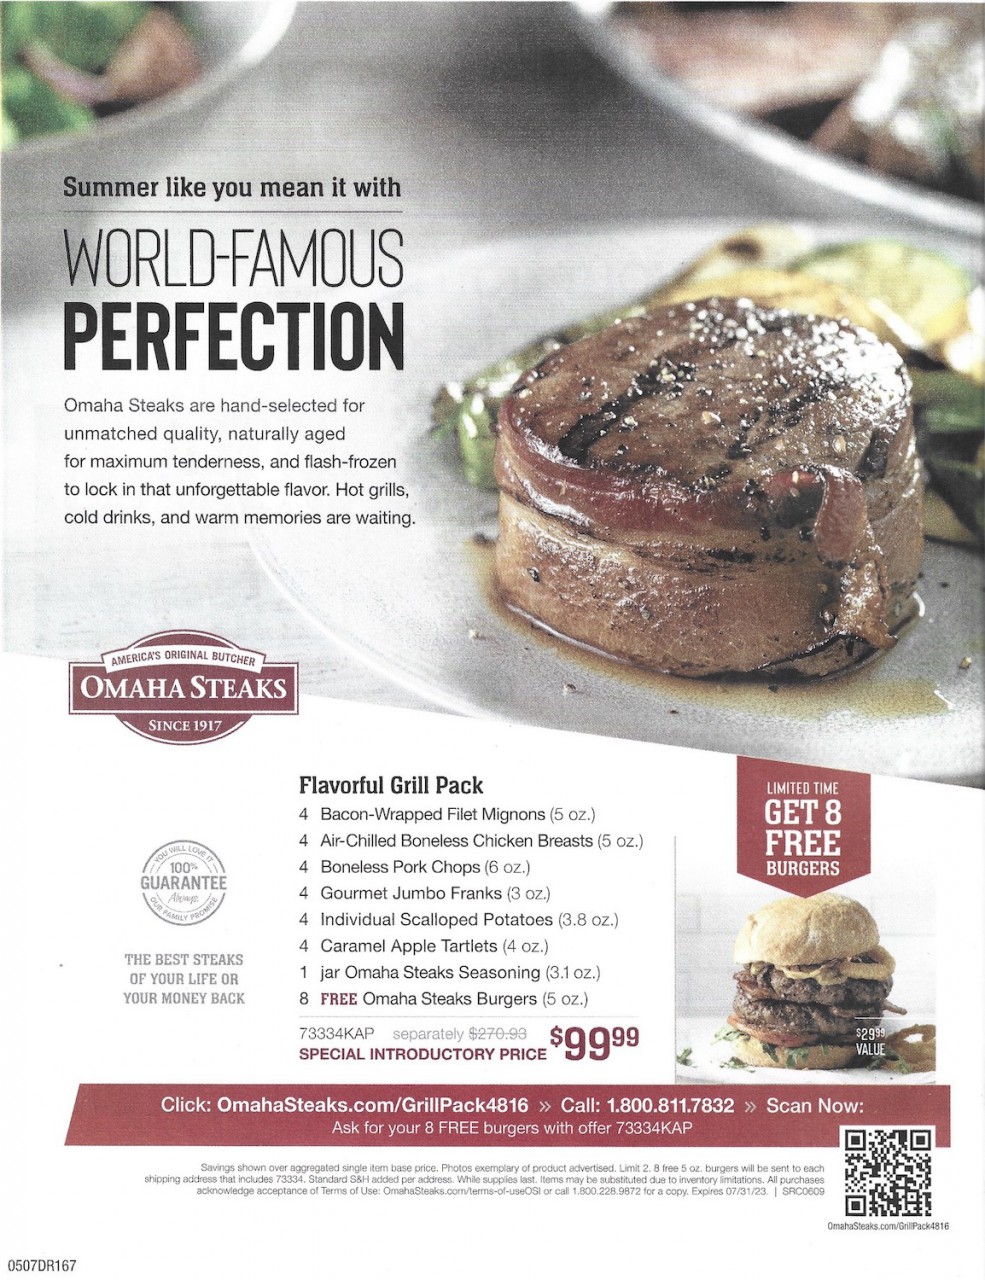 Omaha Steaks Flavorful Grill Pack + 8 Free Burgers - Expires 07/31/2023